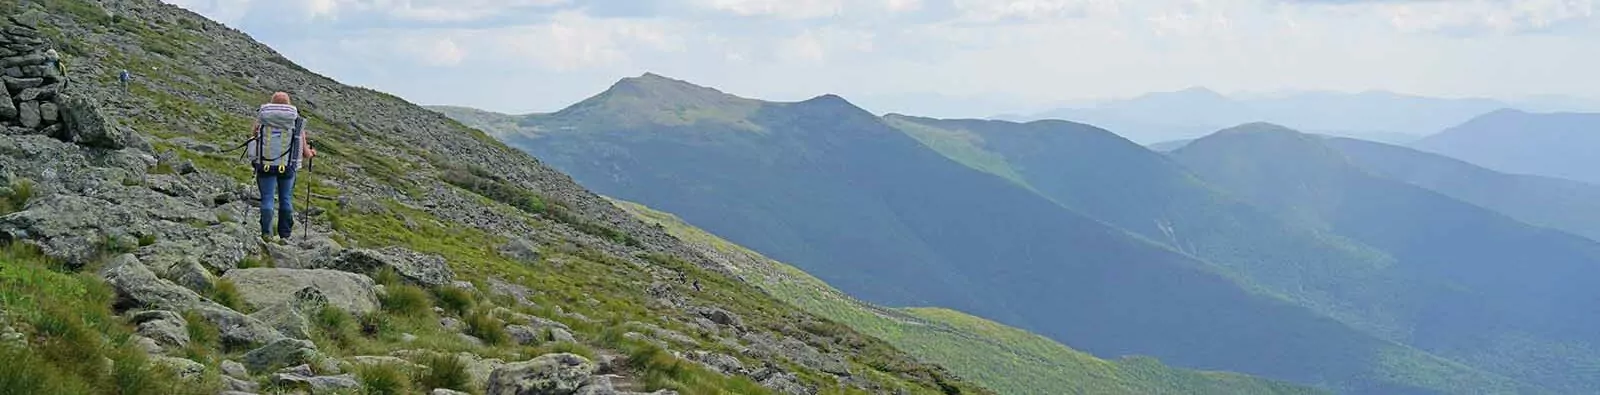 New Hampshire Hiking and Trekking Tours in the White Mountains